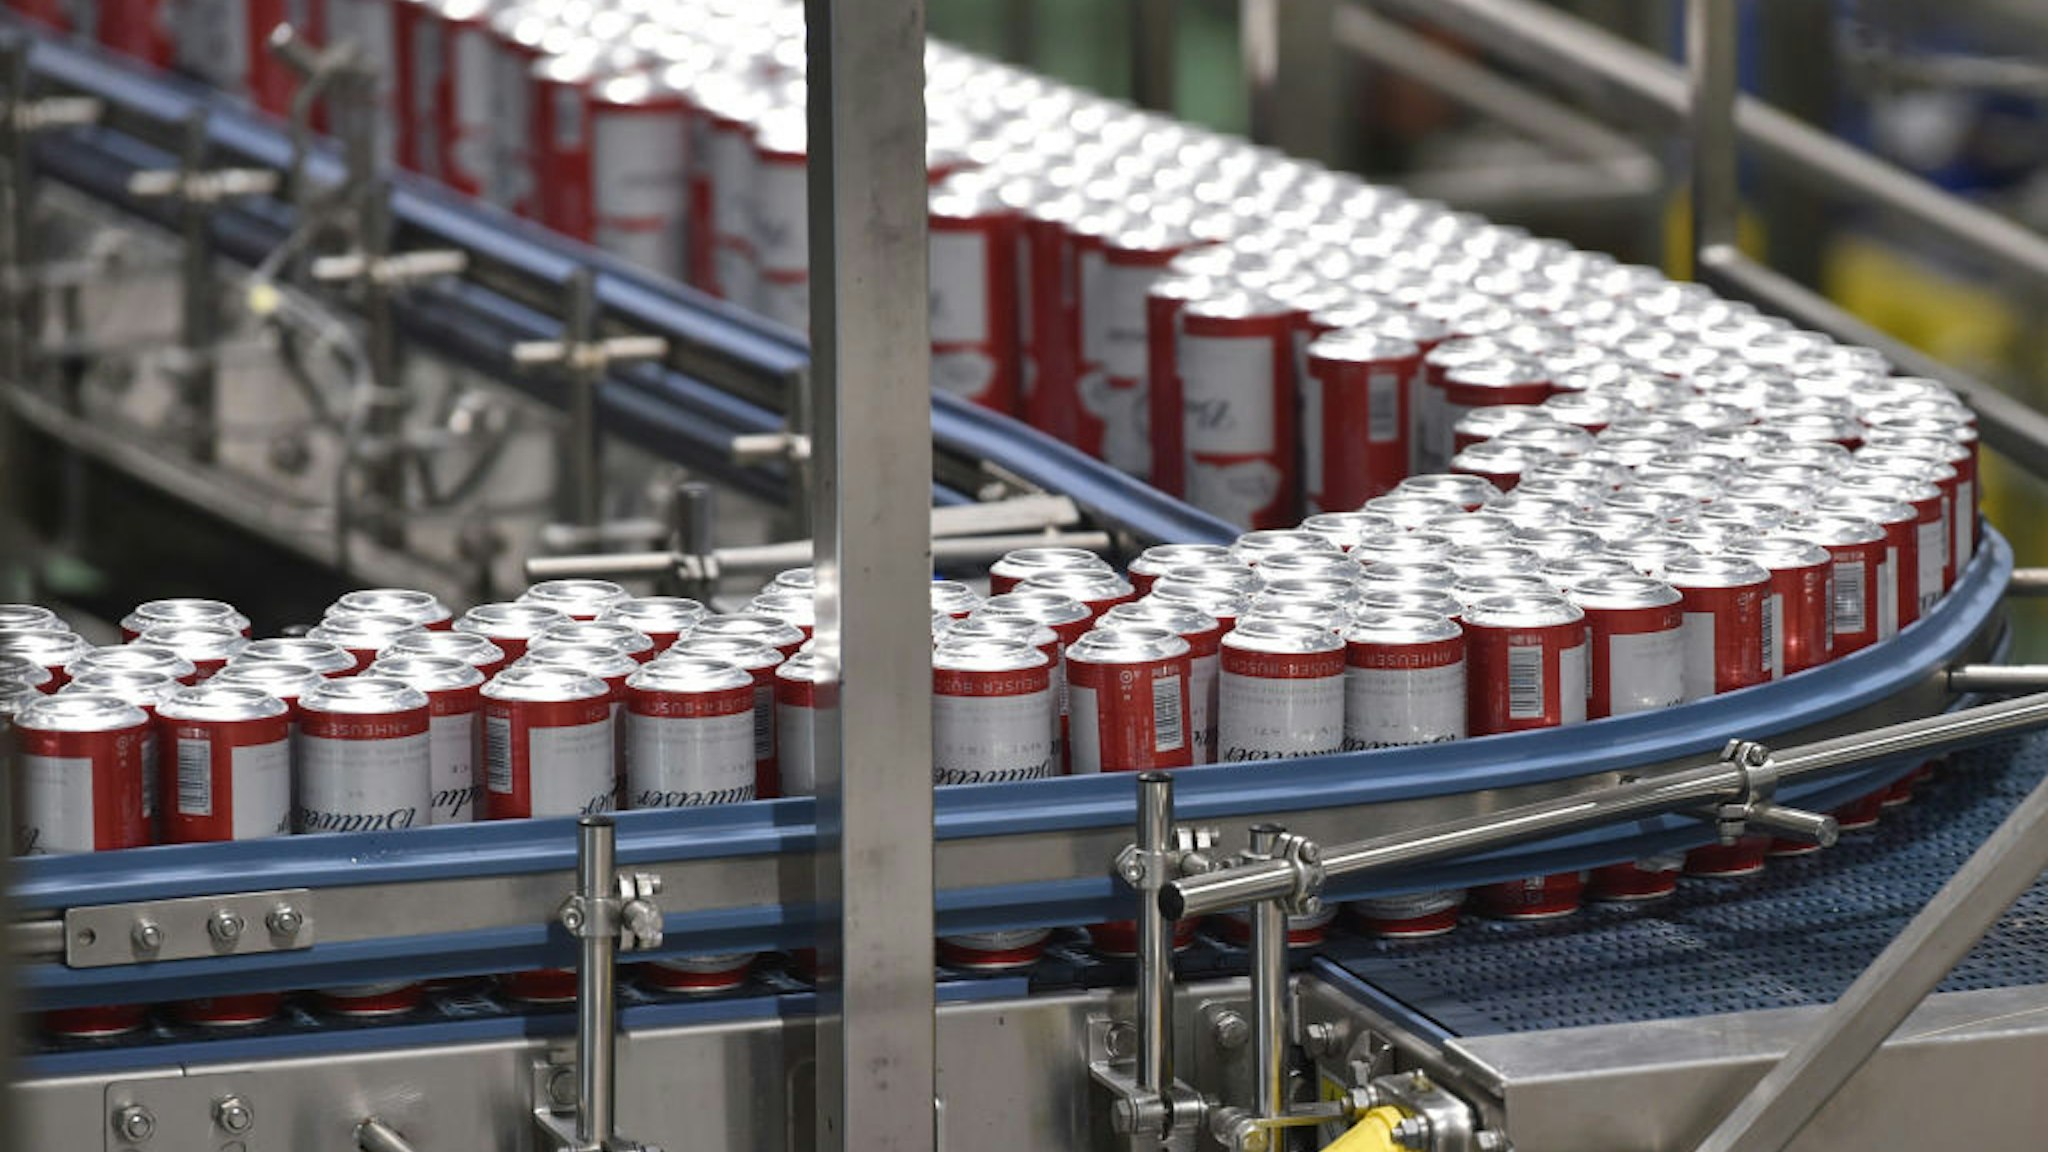 SUQIAN, CHINA - APRIL 12, 2023 - An automated production line of Budweiser beer is seen at a workshop of Anheuser-Busch InBev (Suqian) Beer Co LTD in Suqian, Jiangsu Province, China, April 12, 2023. (Photo credit should read